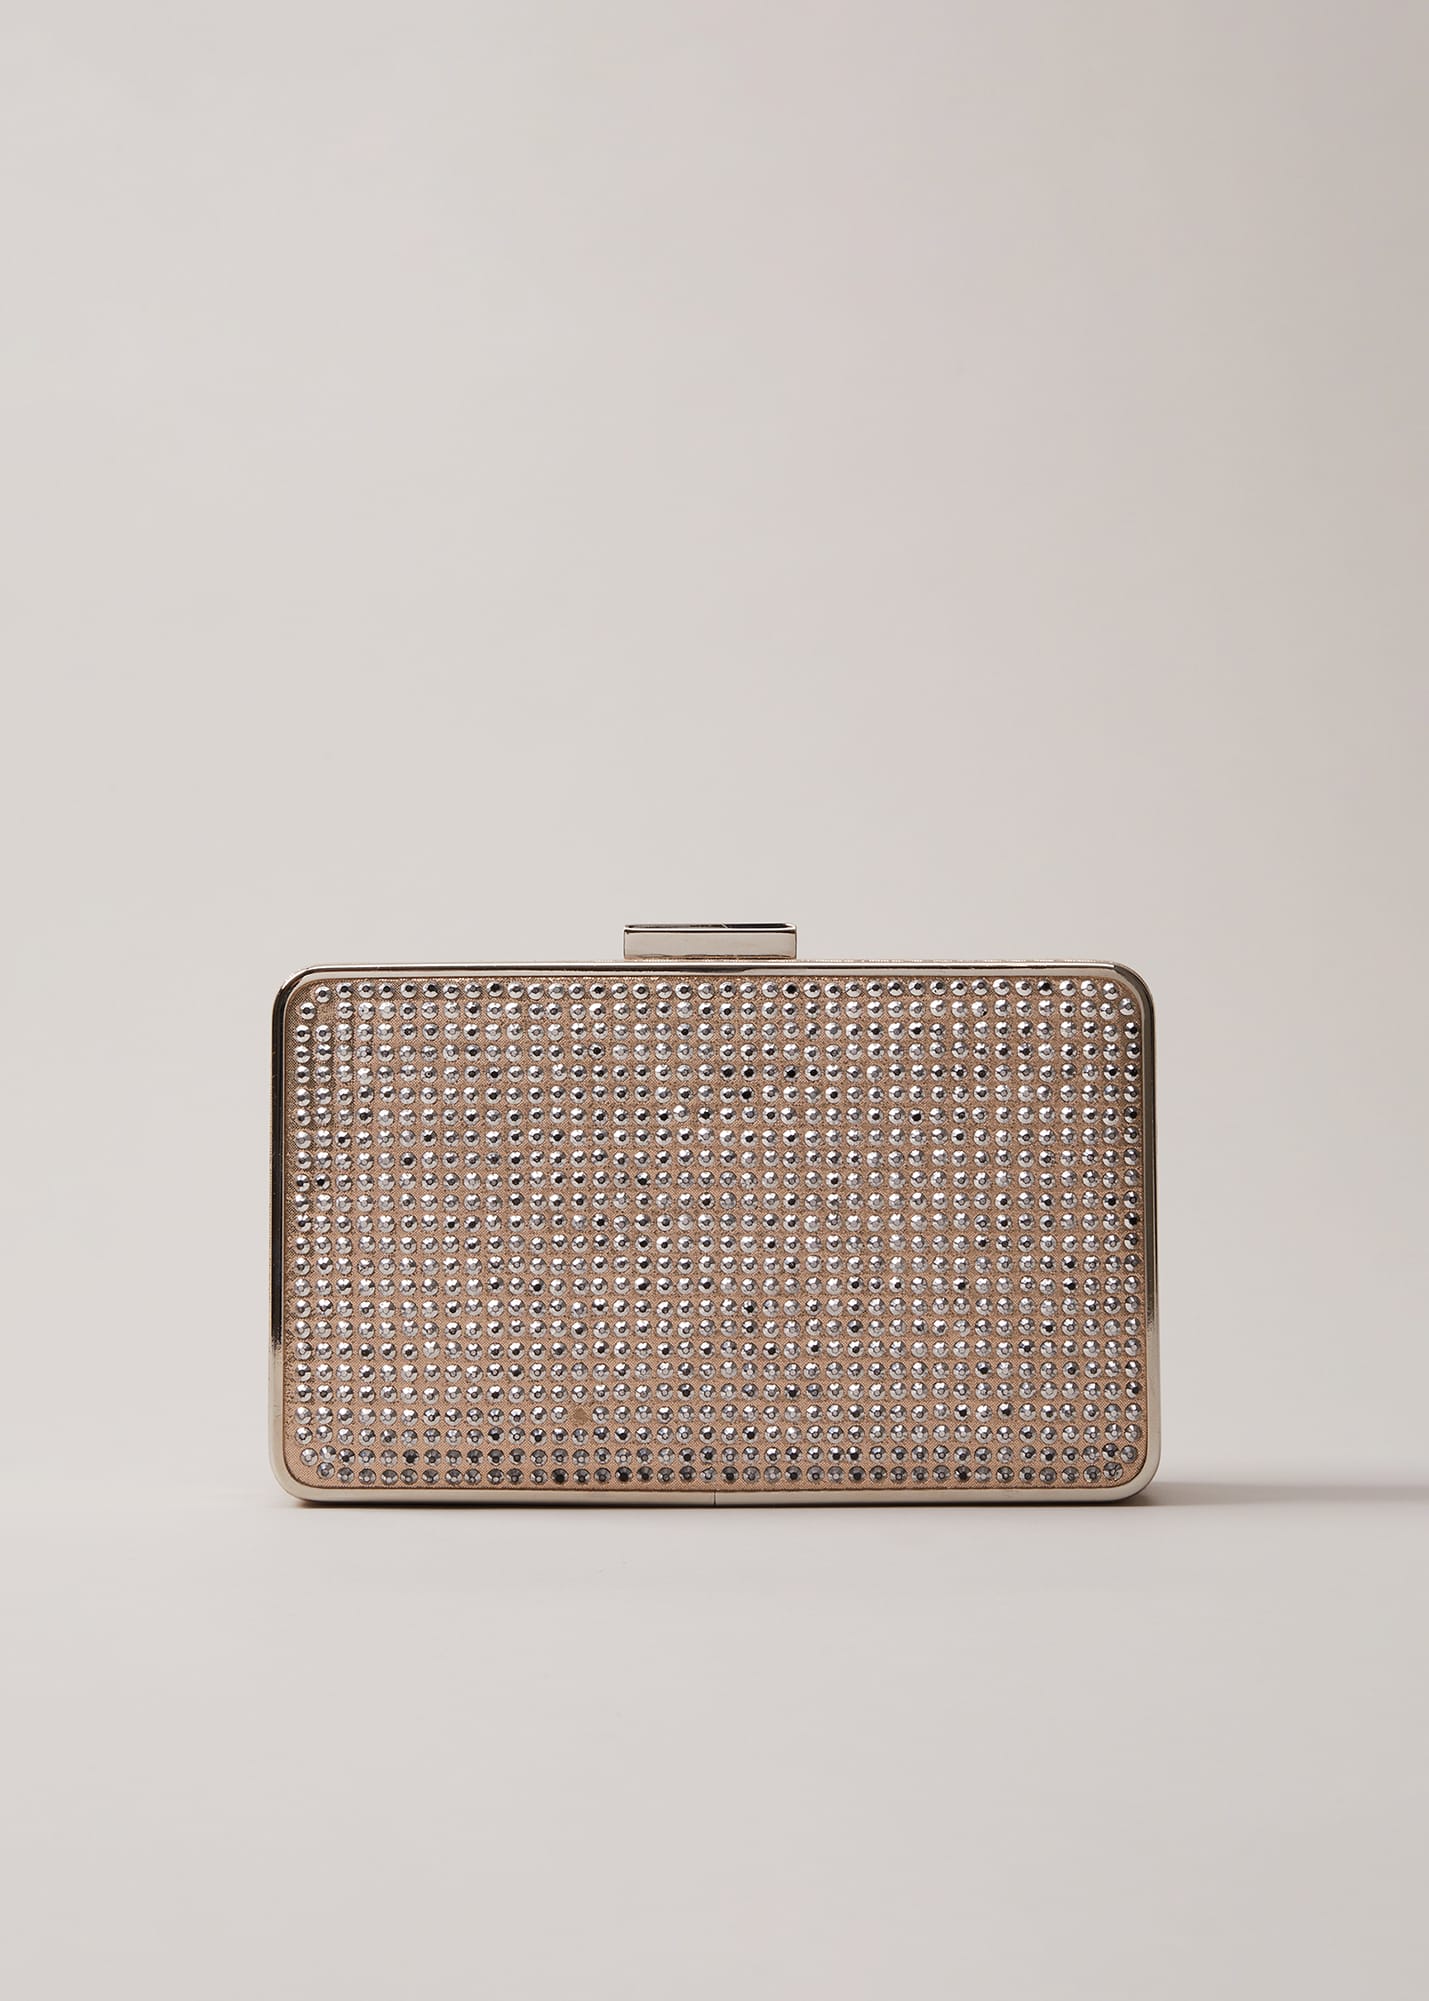 Phase Eight Women's Silver Sparkly Clutch Bag